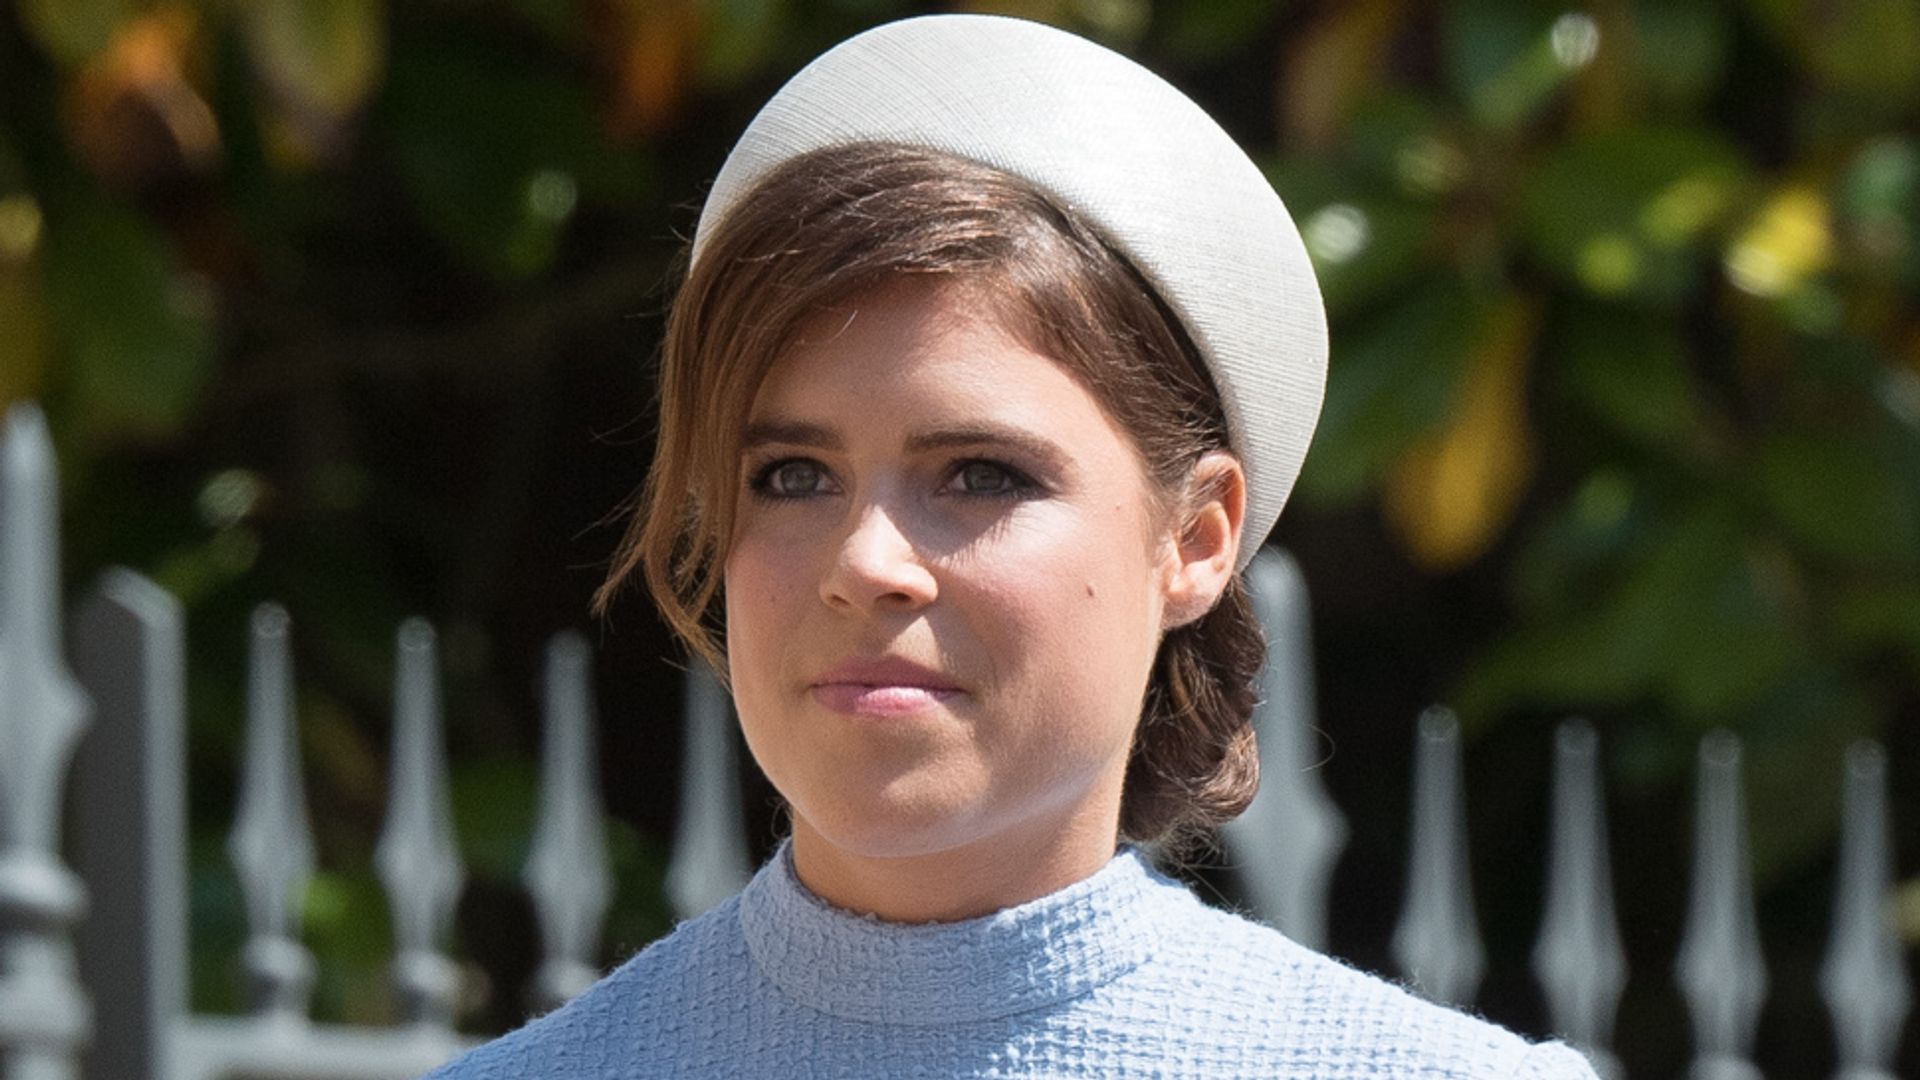 Princess Eugenie of York attends wedding of Prince Harry to Ms Meghan Markle at St George's Chapel, Windsor Castle on May 19, 2018 in Windsor, England. P